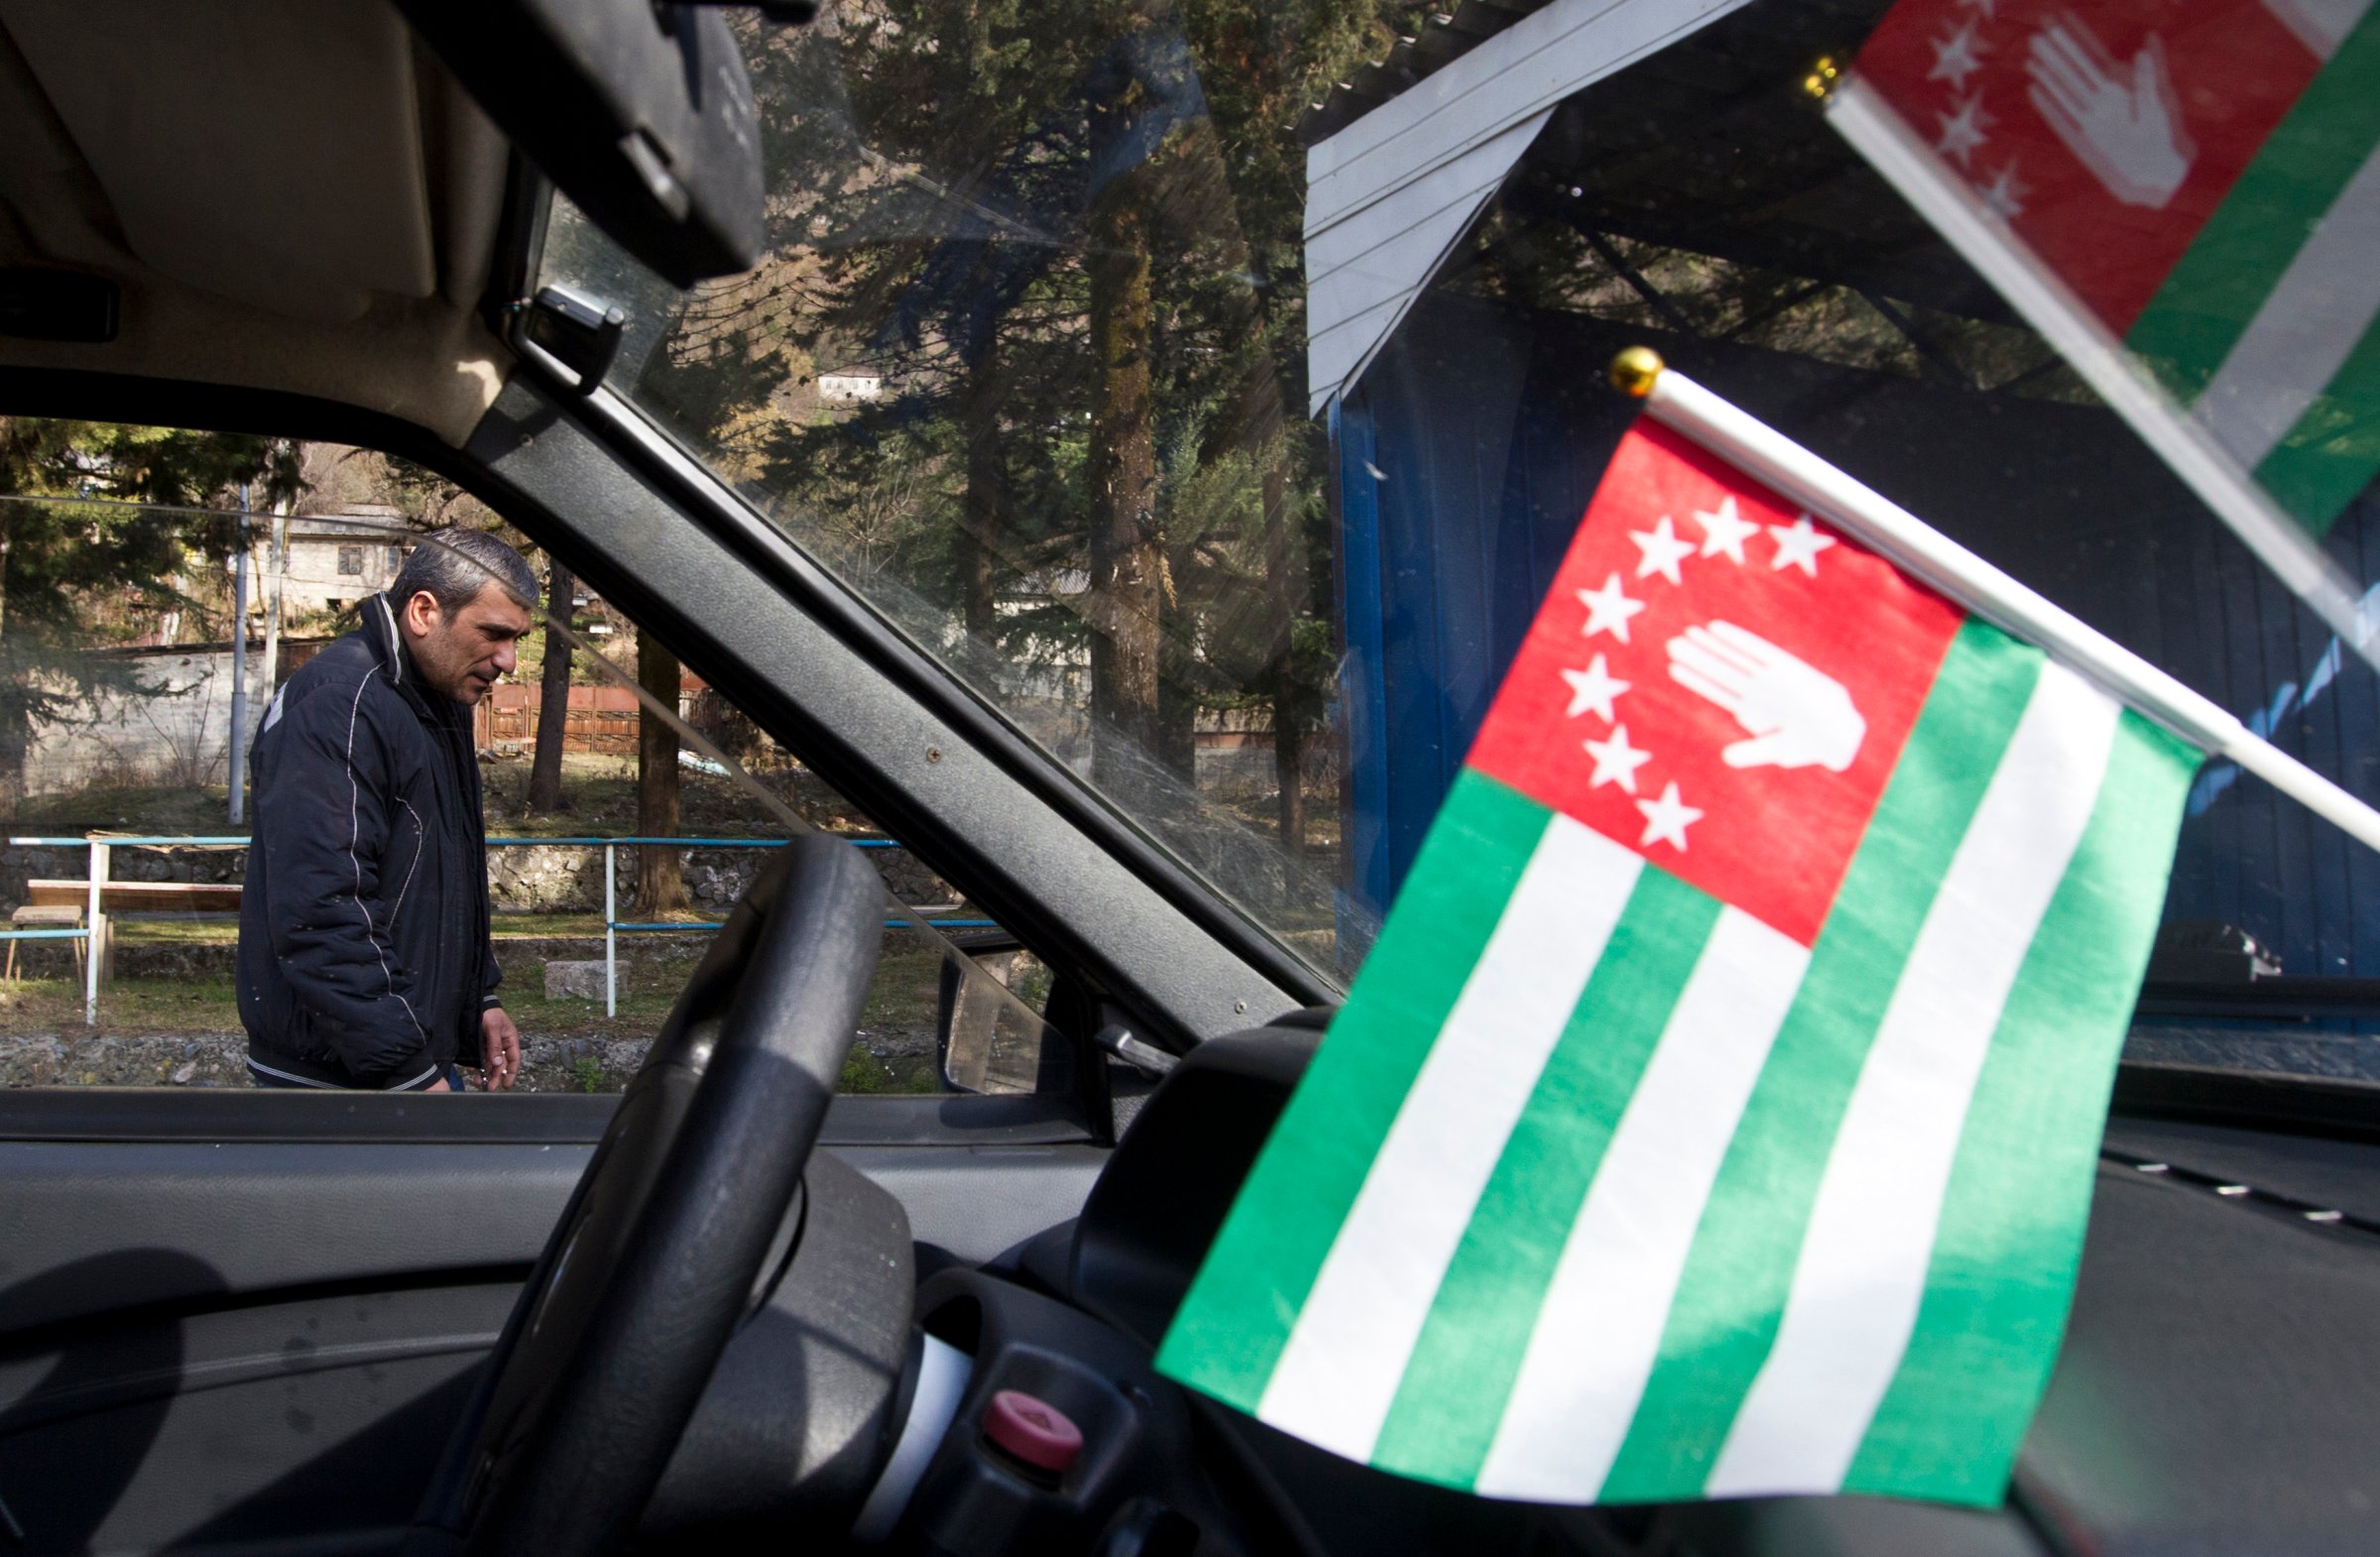 A flag of Abkhazia is on display inside a car in the town of Tkvarcheli